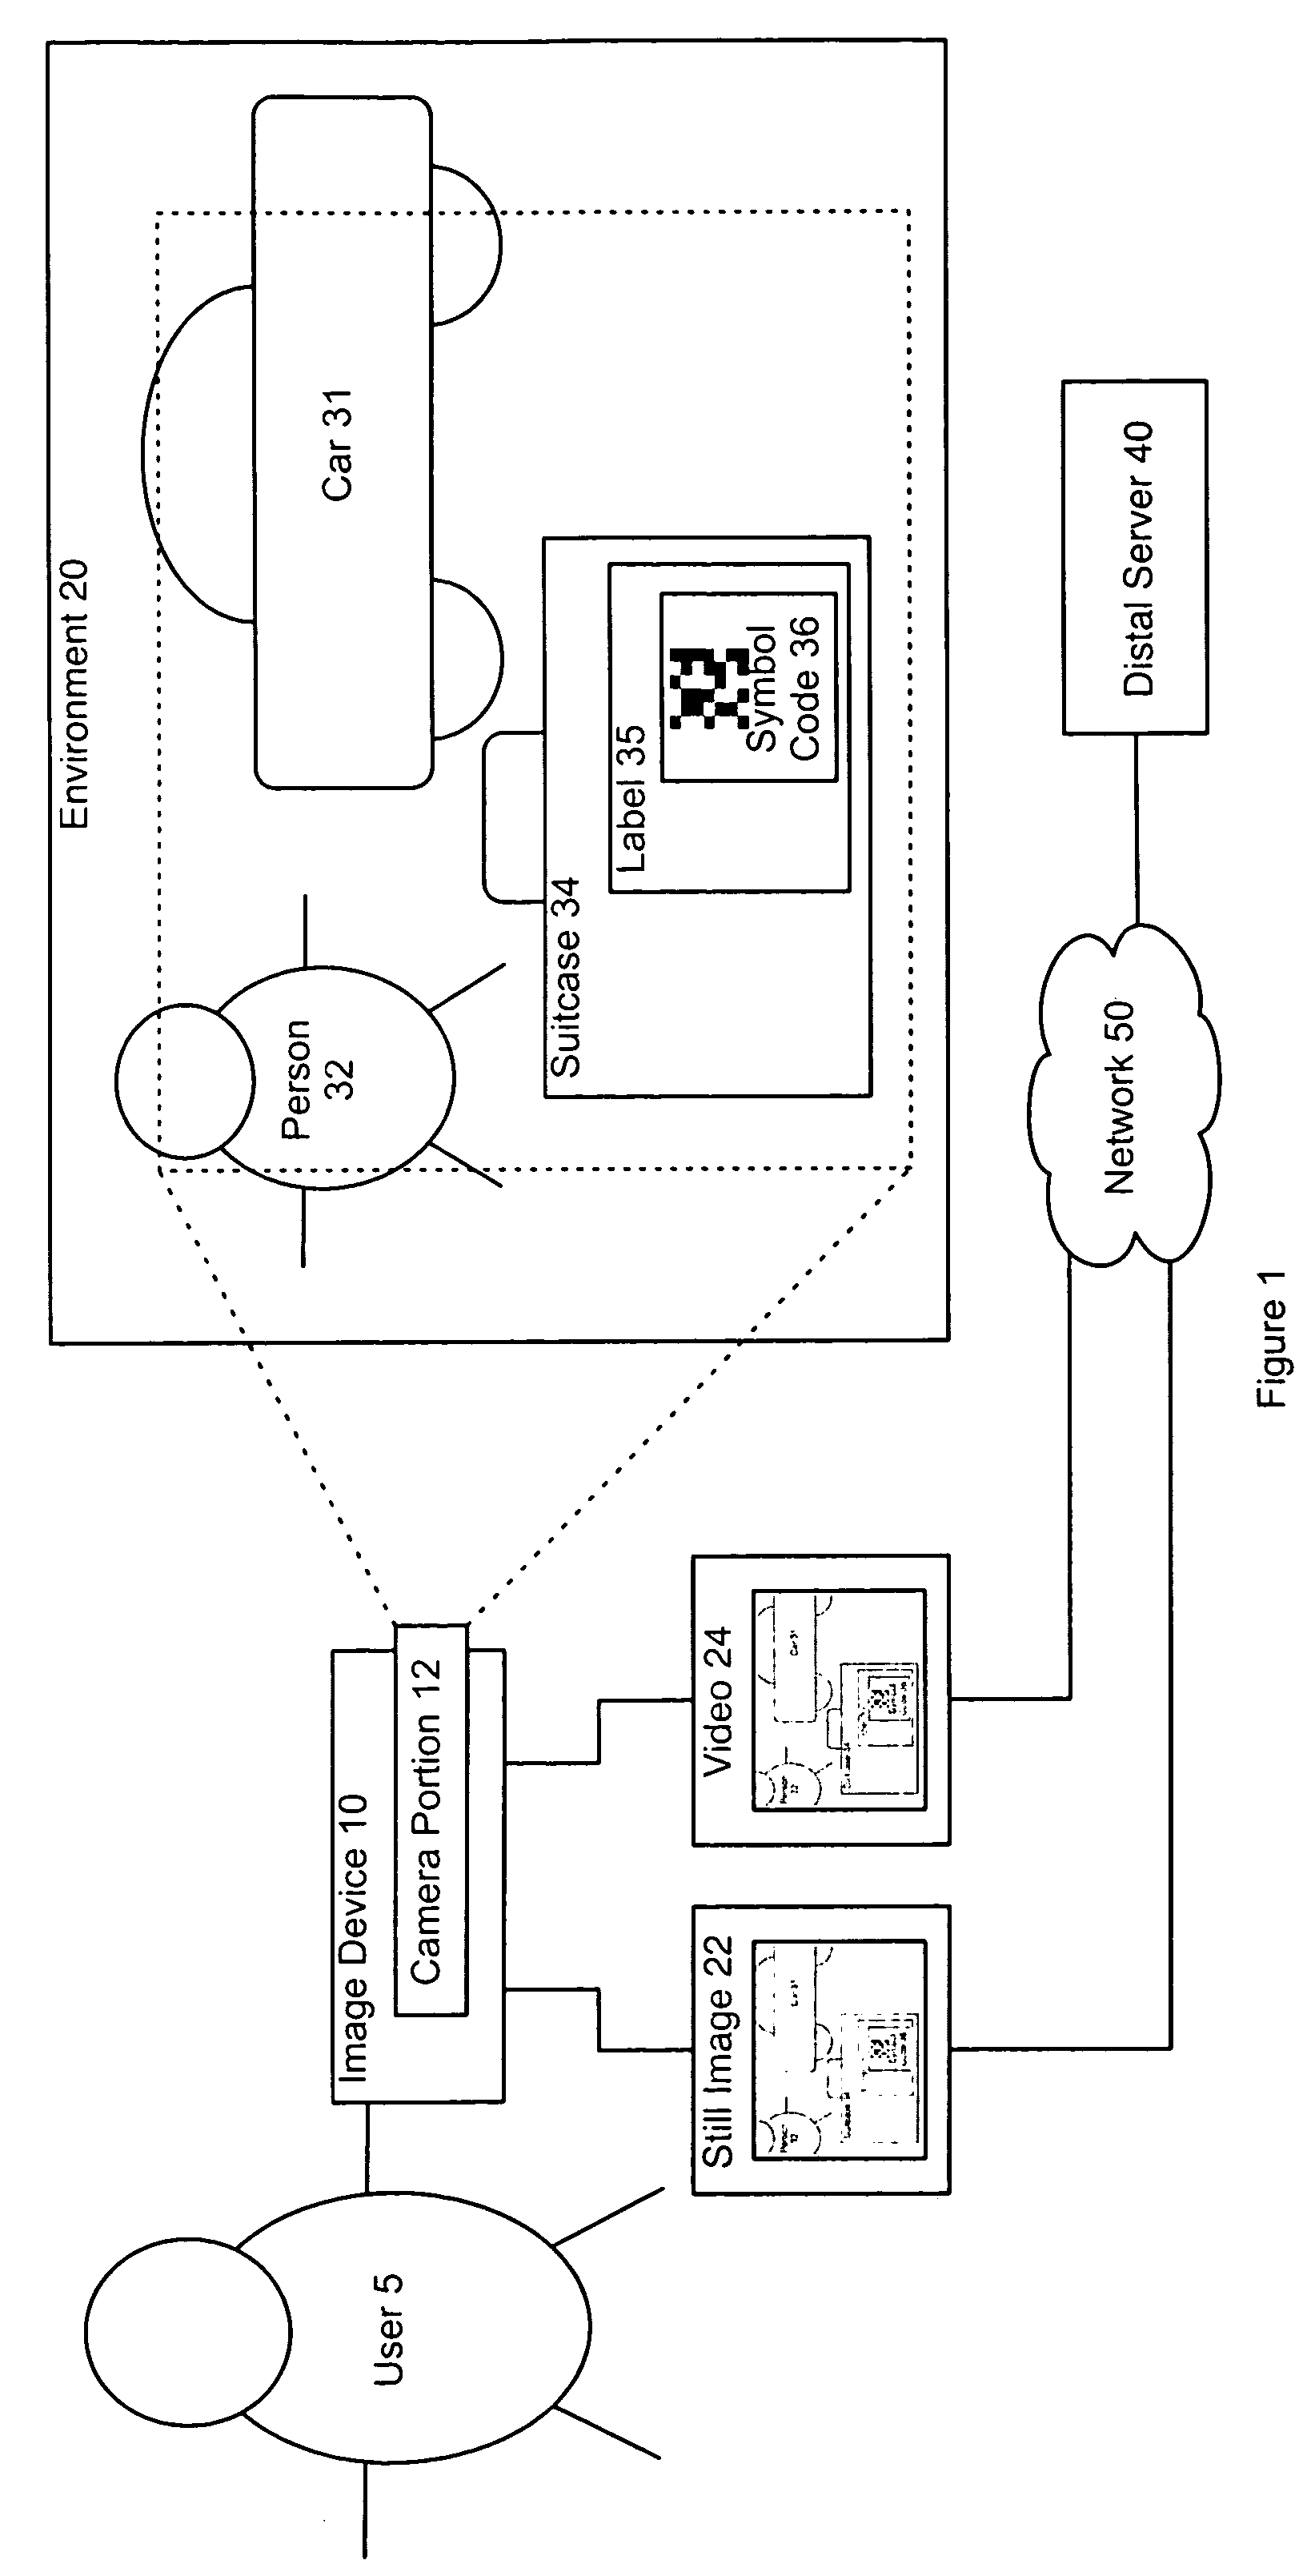 Methods and devices for detecting linkable objects